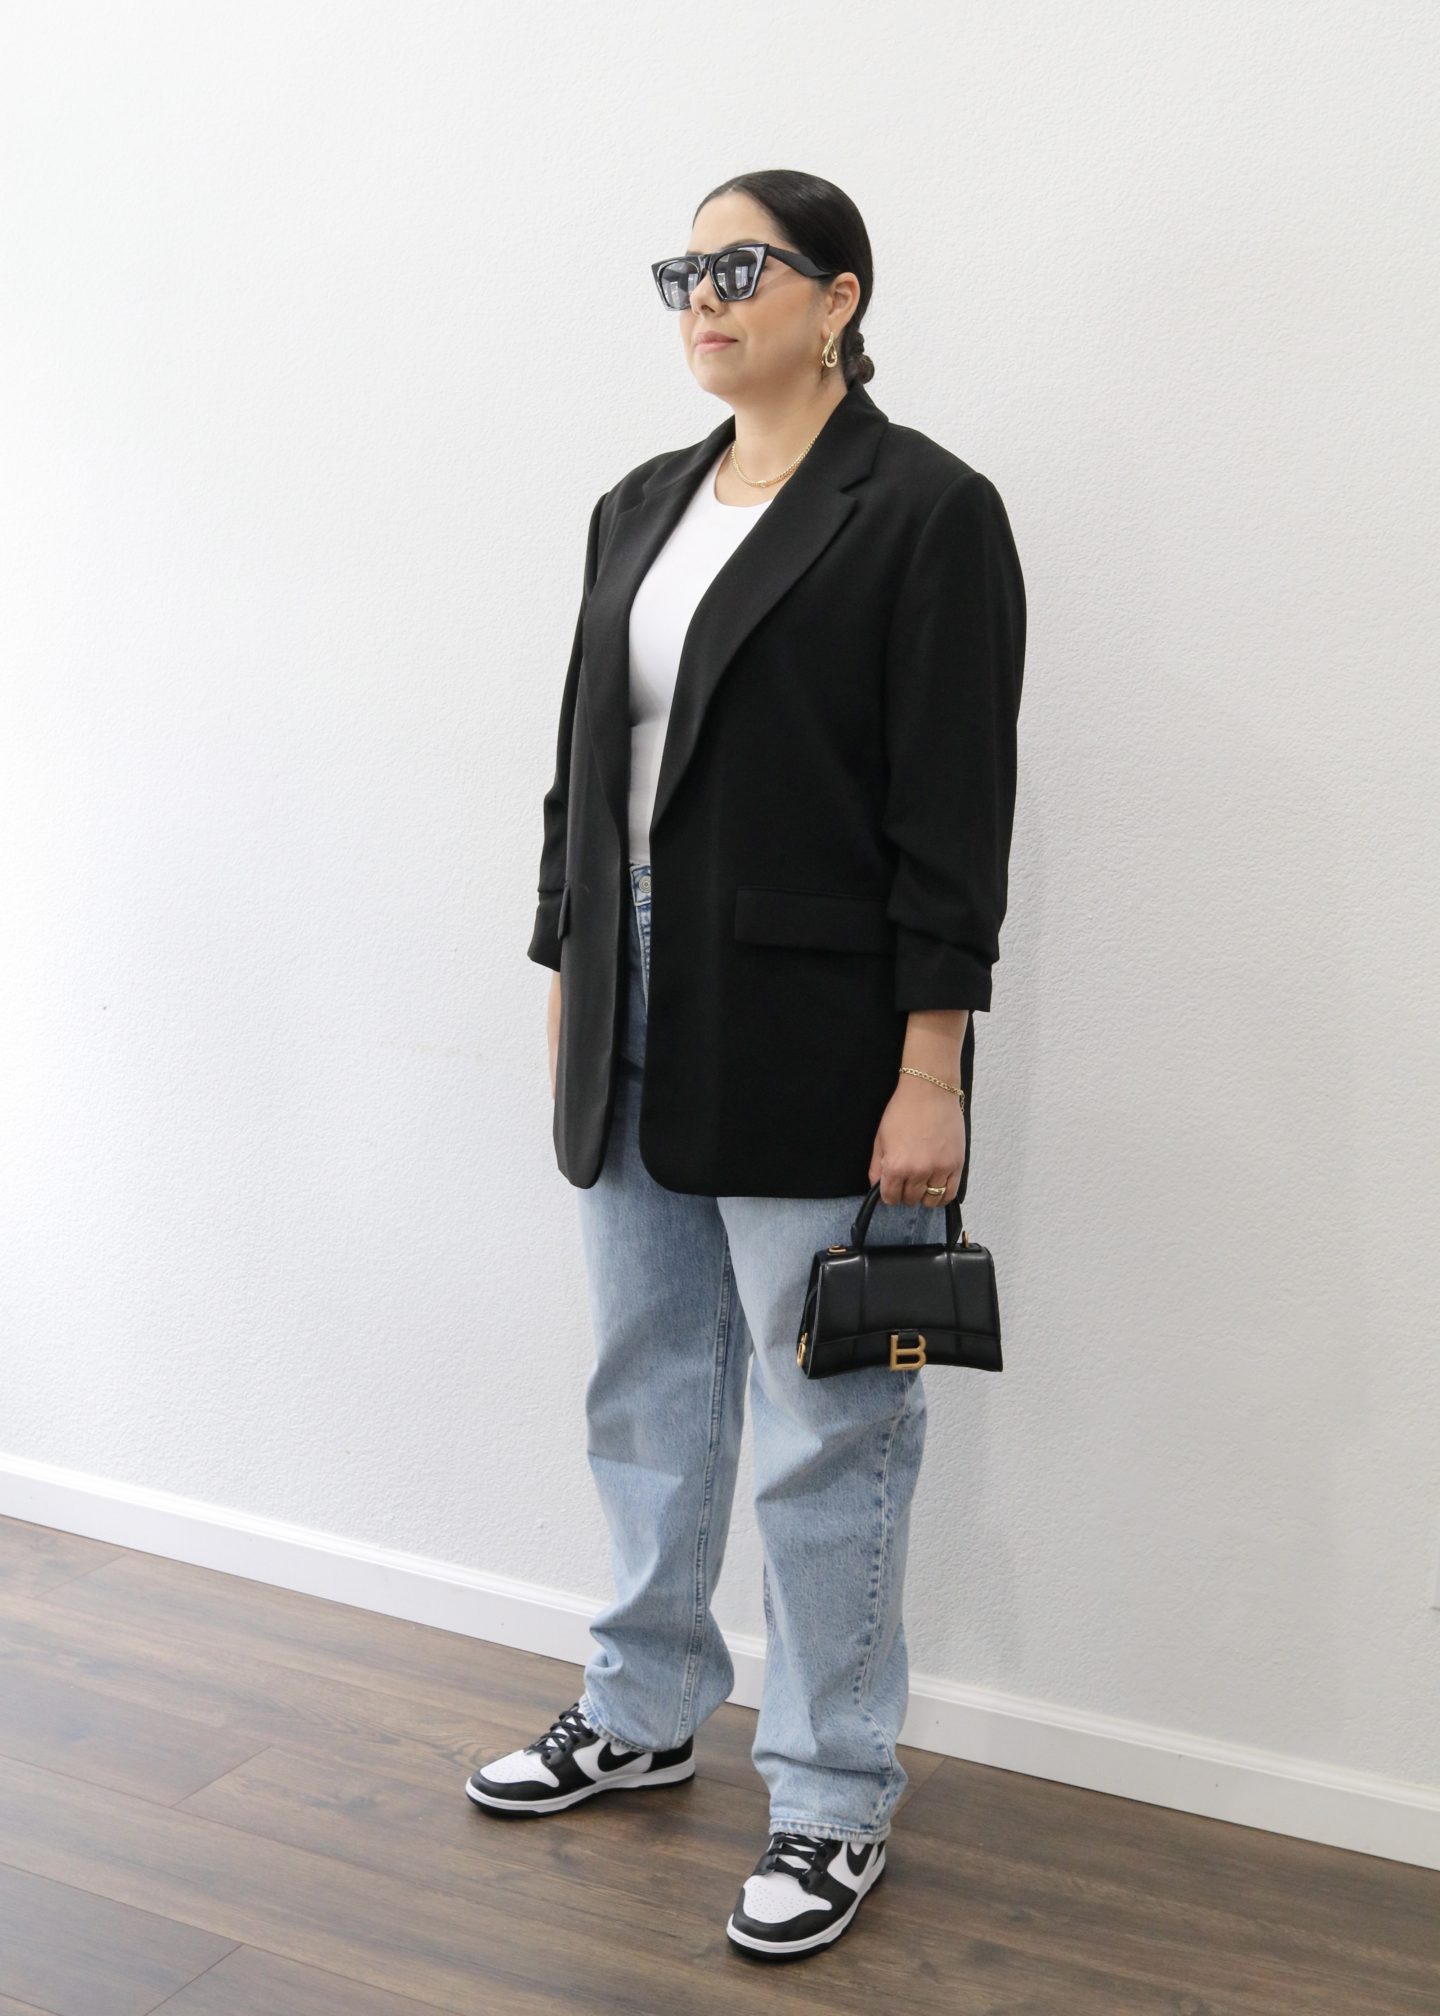 Casual outfit with black and white high top dunks - Lil bits of Chic